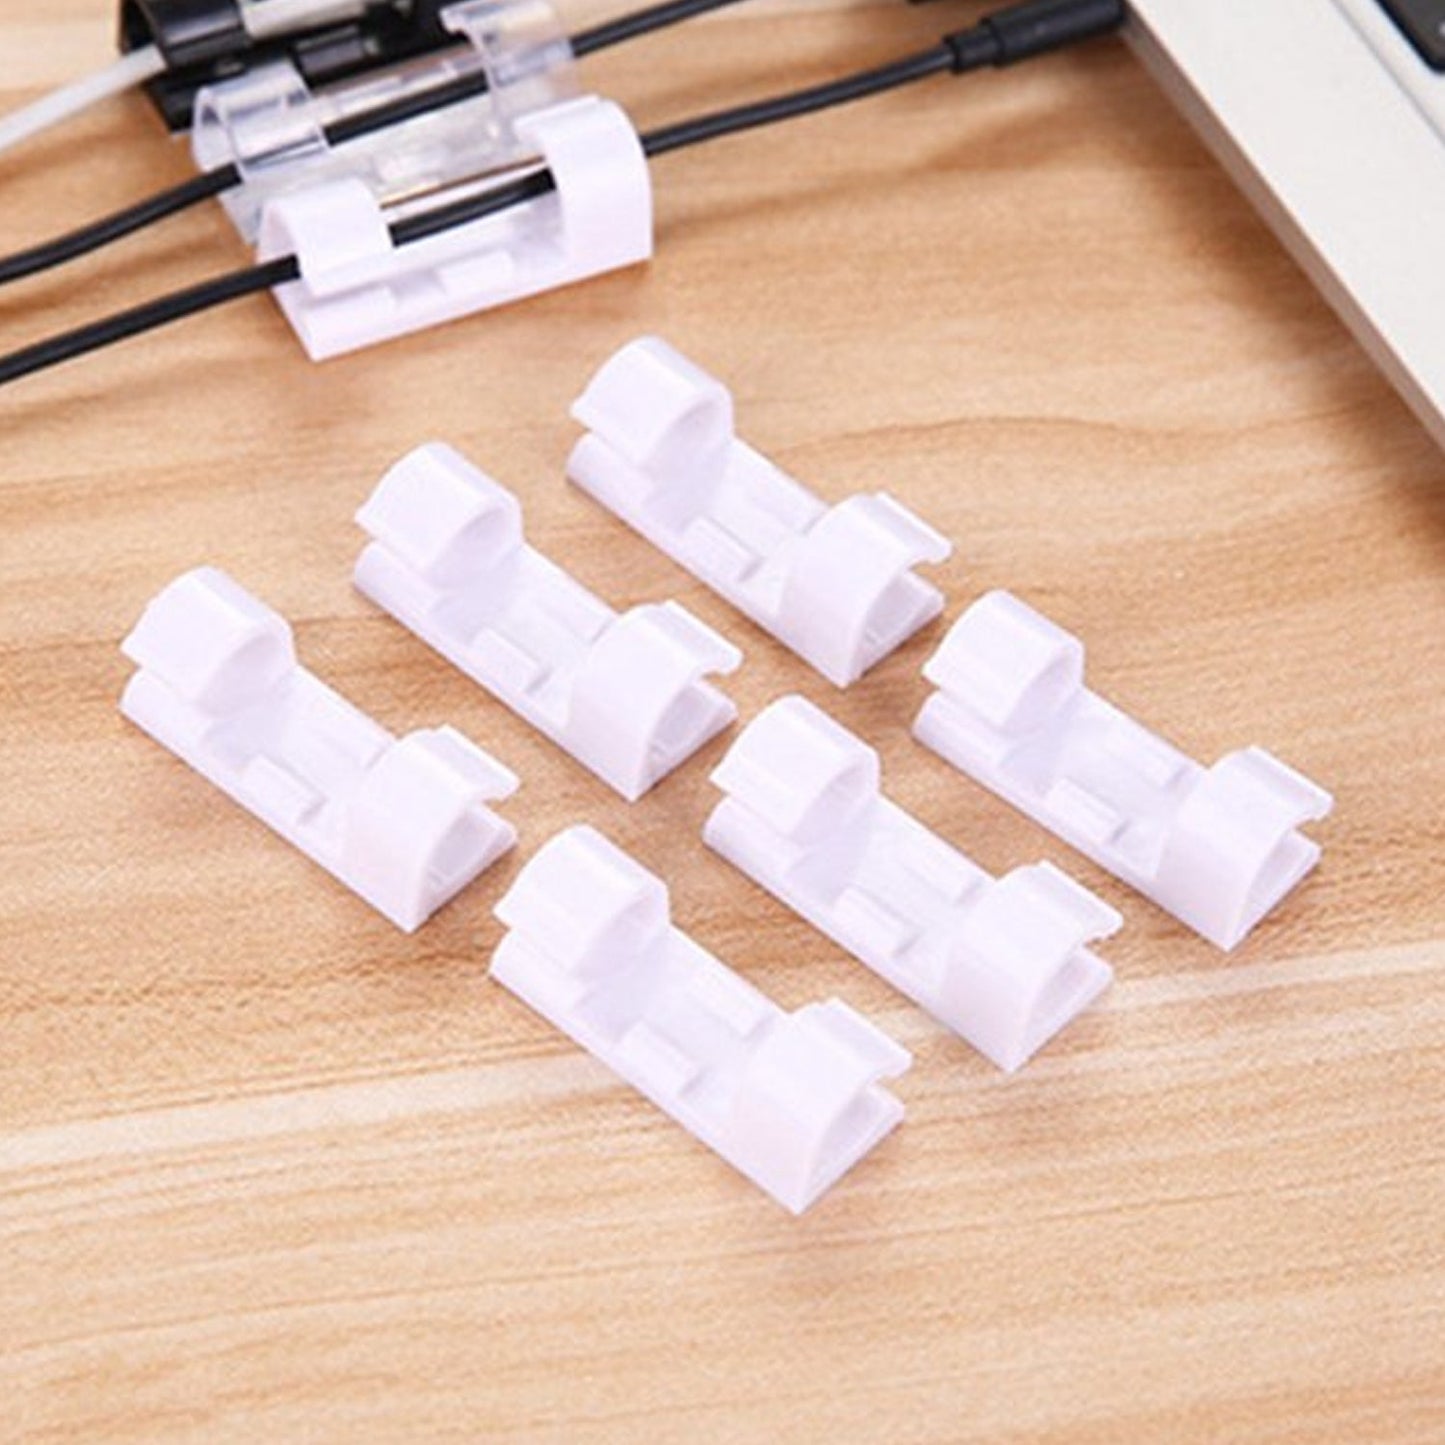 9502 Plastic Clips Stronger Adhesive Tape | Cable Manager | Wire Manager | Wire Clamp | Wire Clips for Cable| Cable Organizer Cord Holder | Cord Clips for Car, Office and Home (20 Pcs Set)